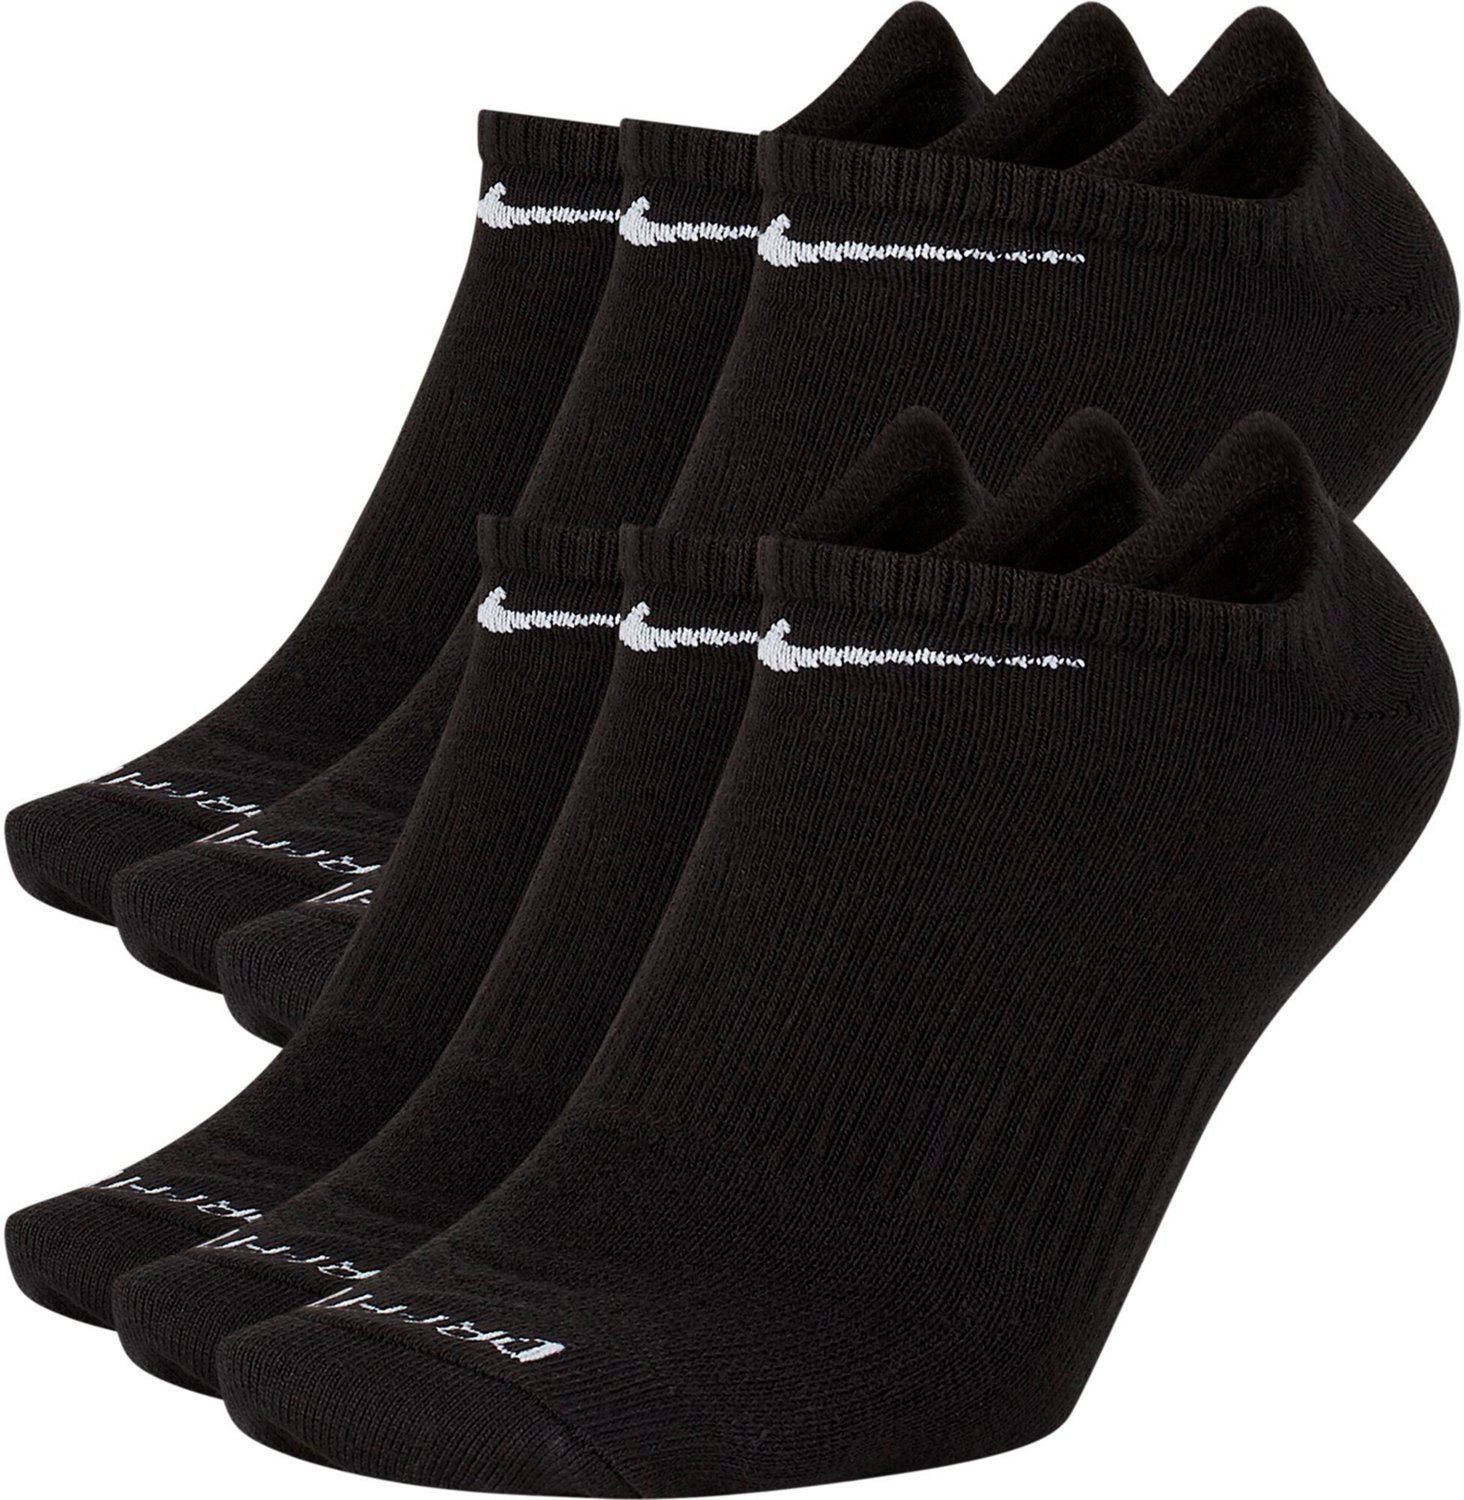 Nike Women's Everyday Plus Lightweight No-Show Socks 6-Pack                                                                      - view number 1 selected